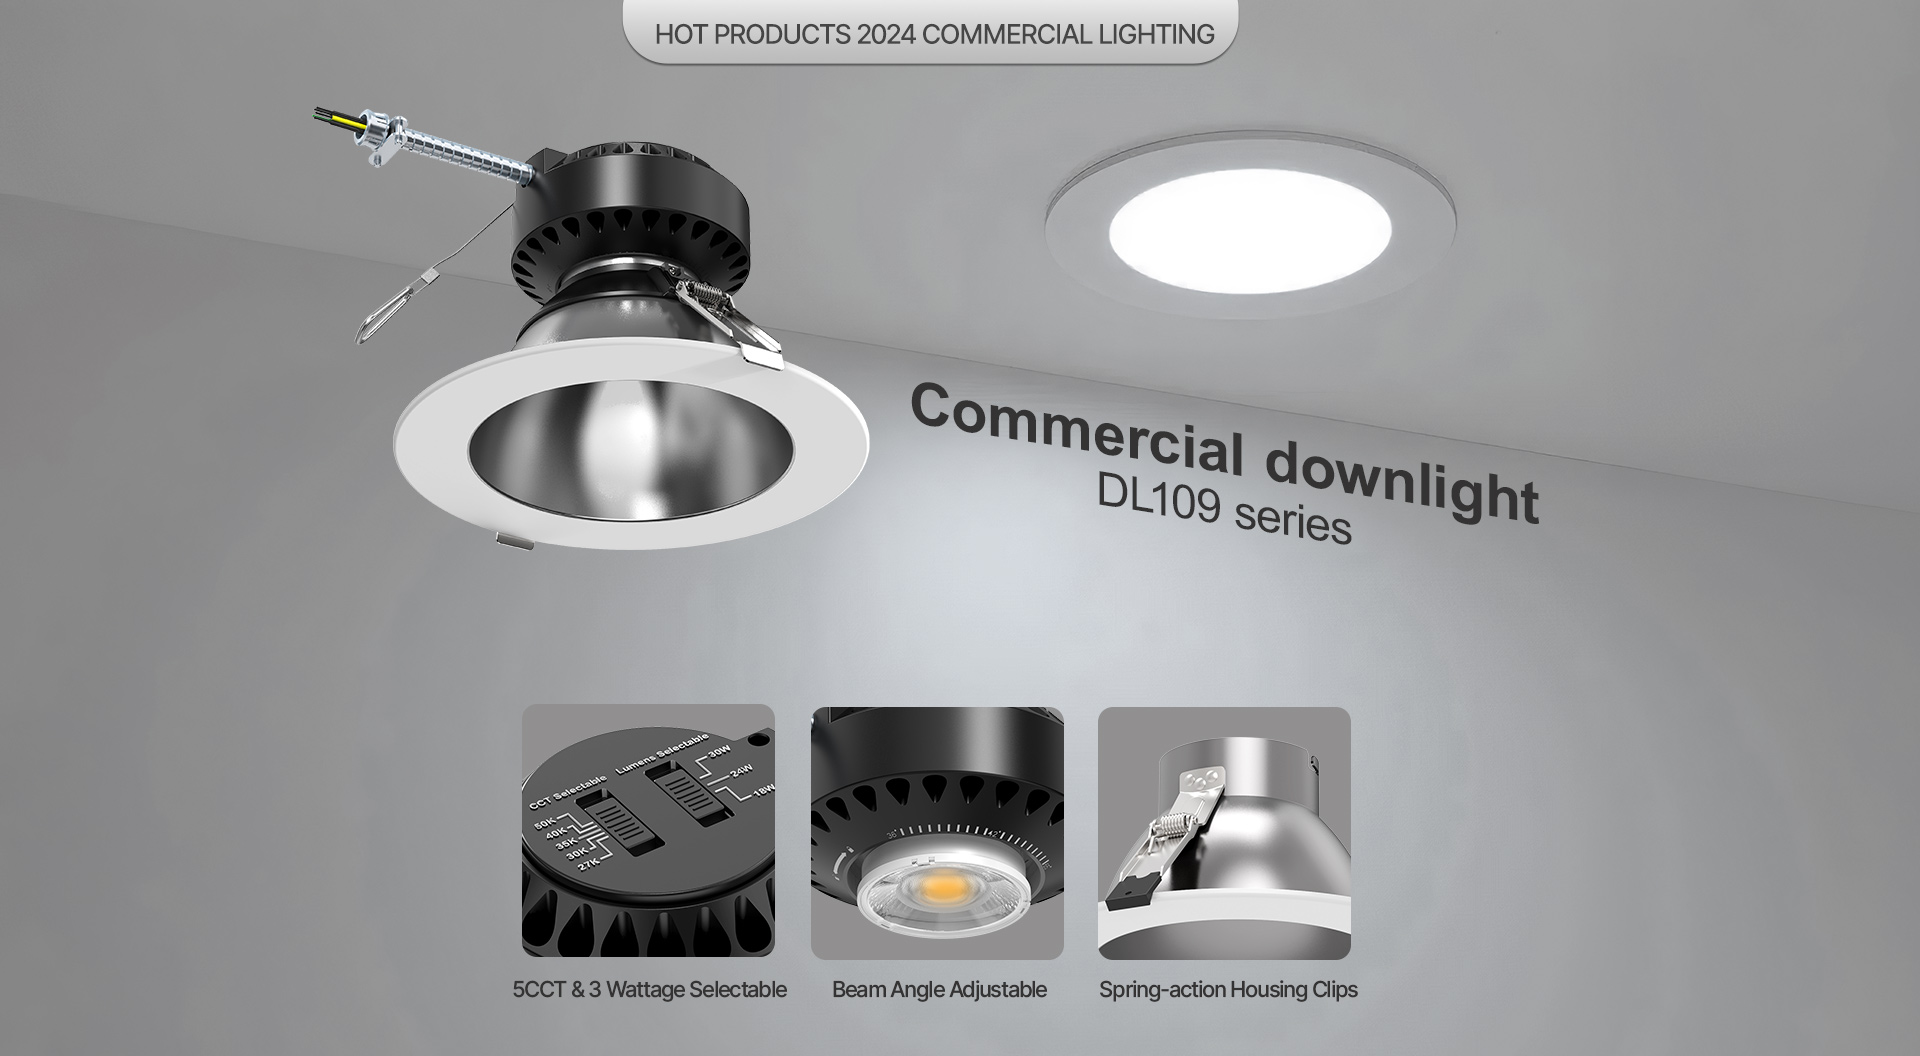 Commercial downlight DL109 series